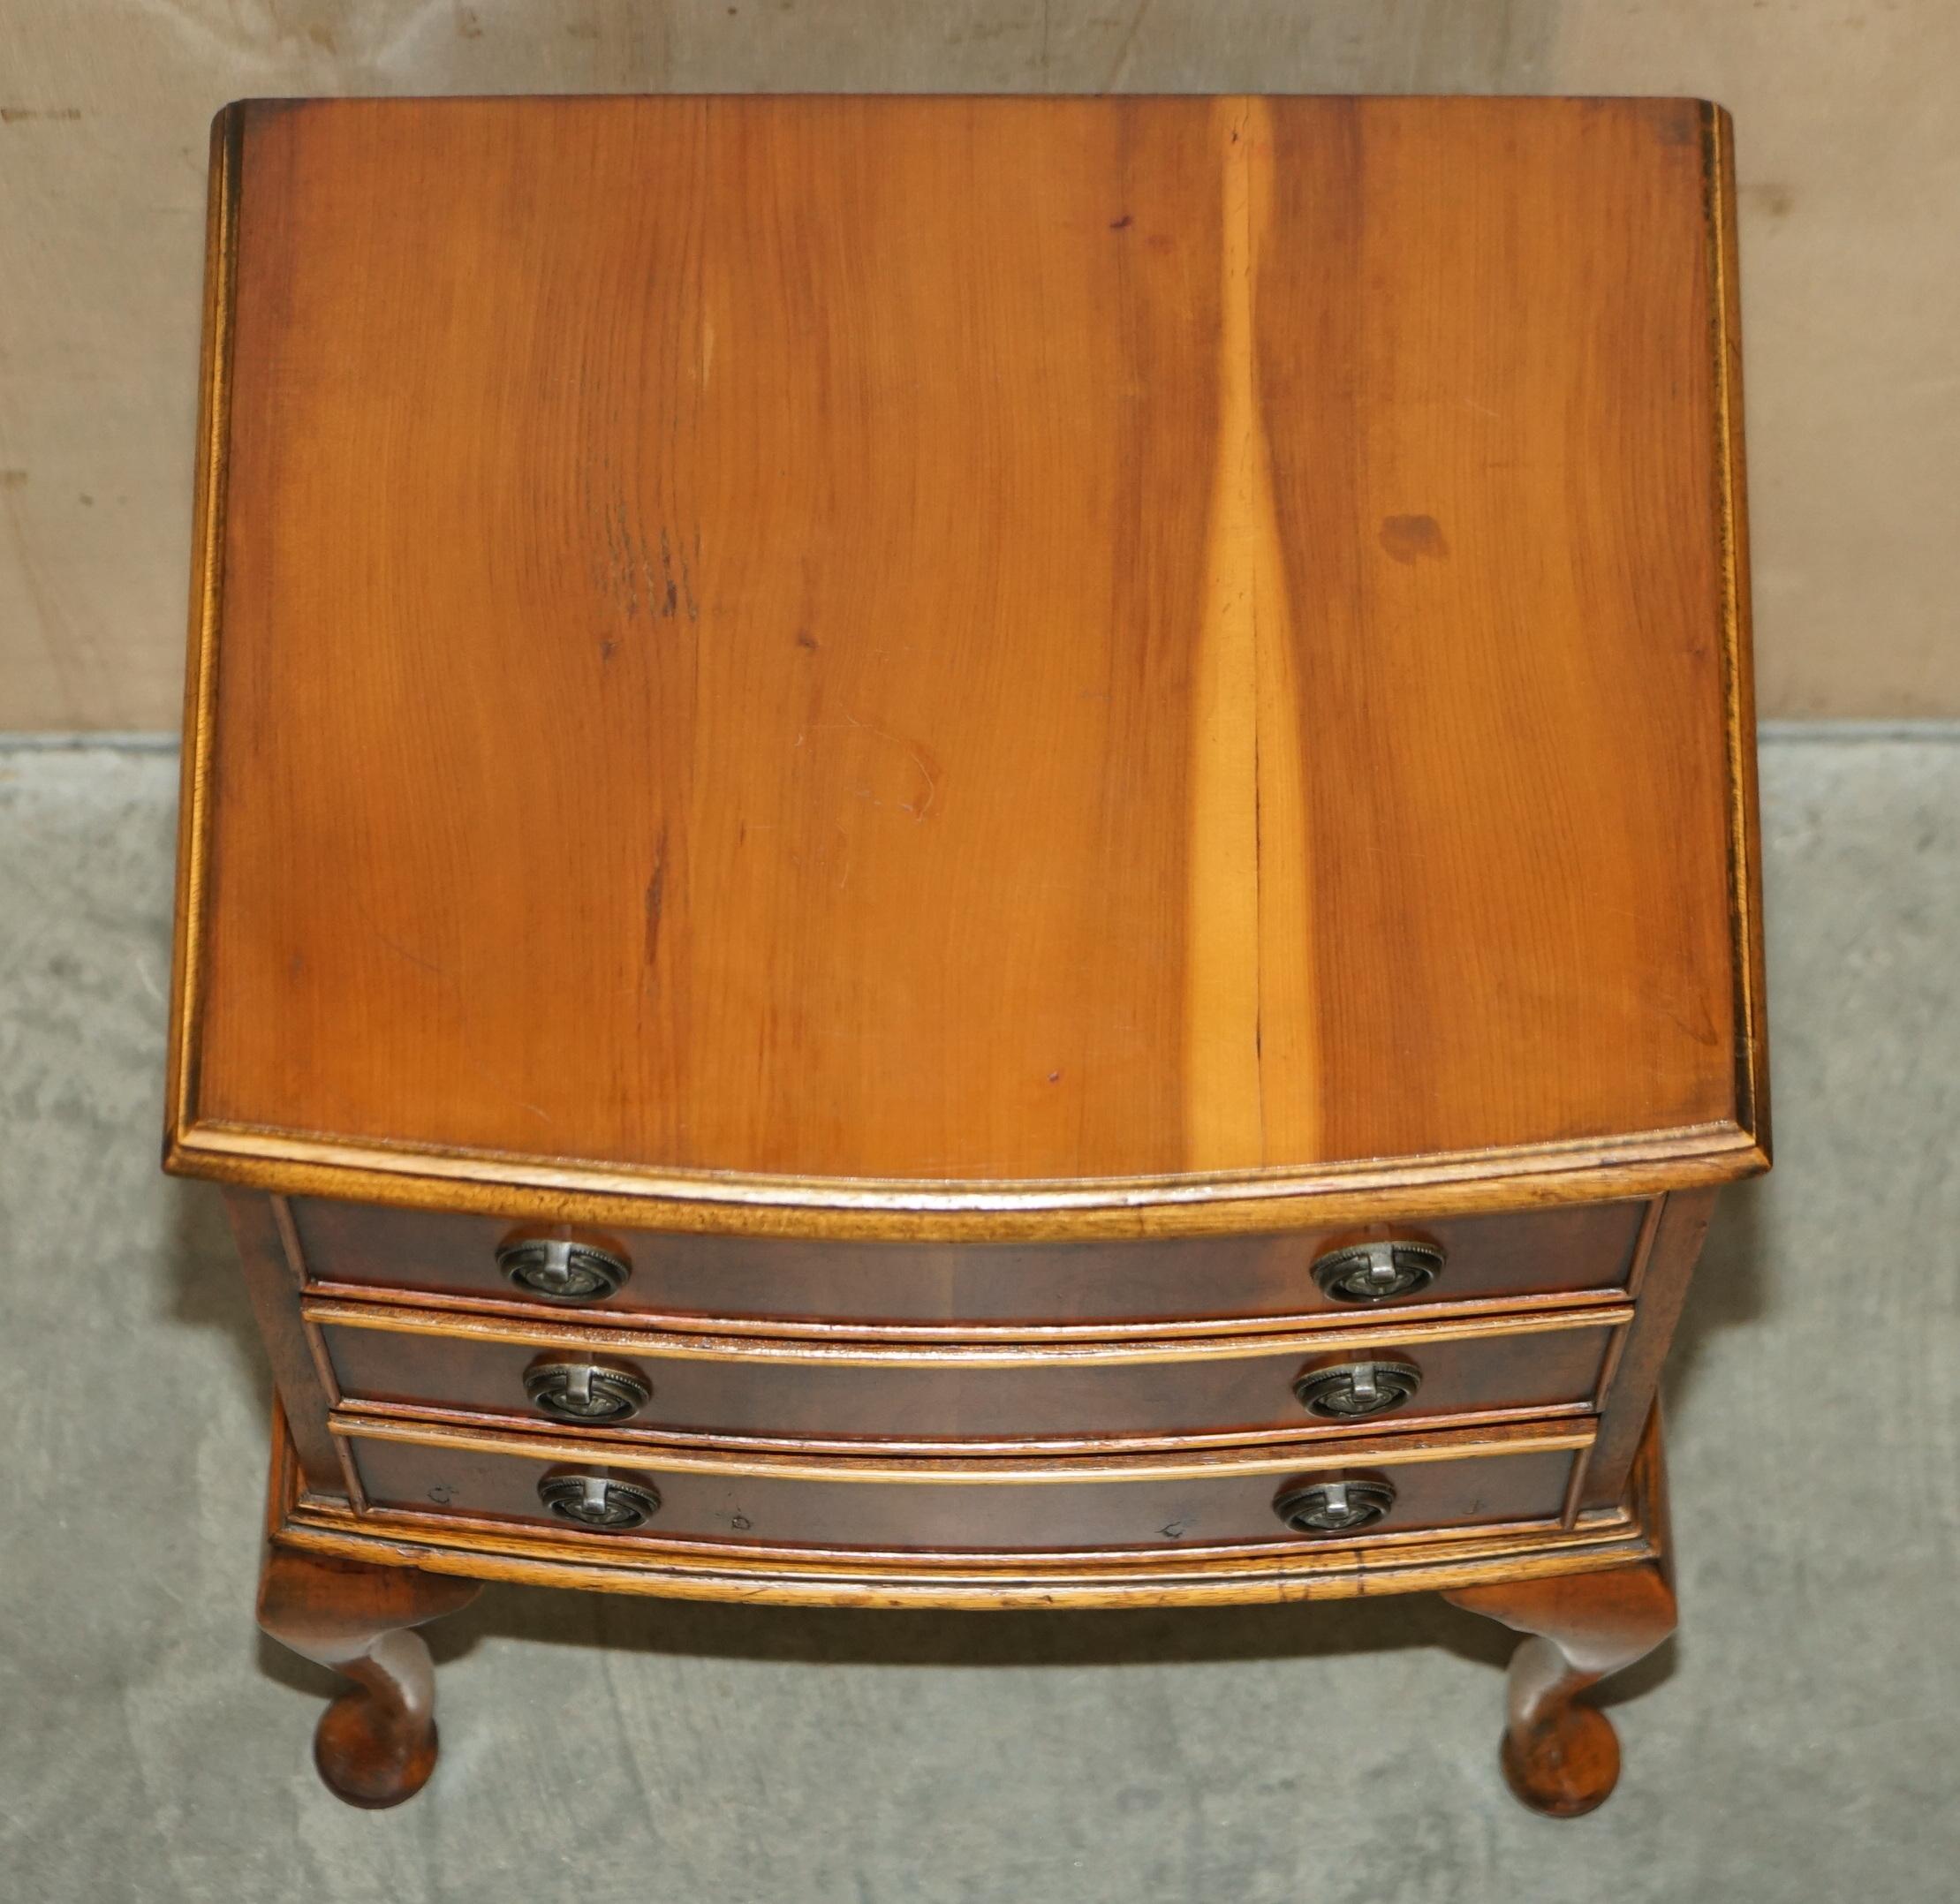 CIRCA 1940's BURR YEW WOOD BOW FRONTED BEDSIDE SIDE TABLE CHEST OF DRAWERS For Sale 3